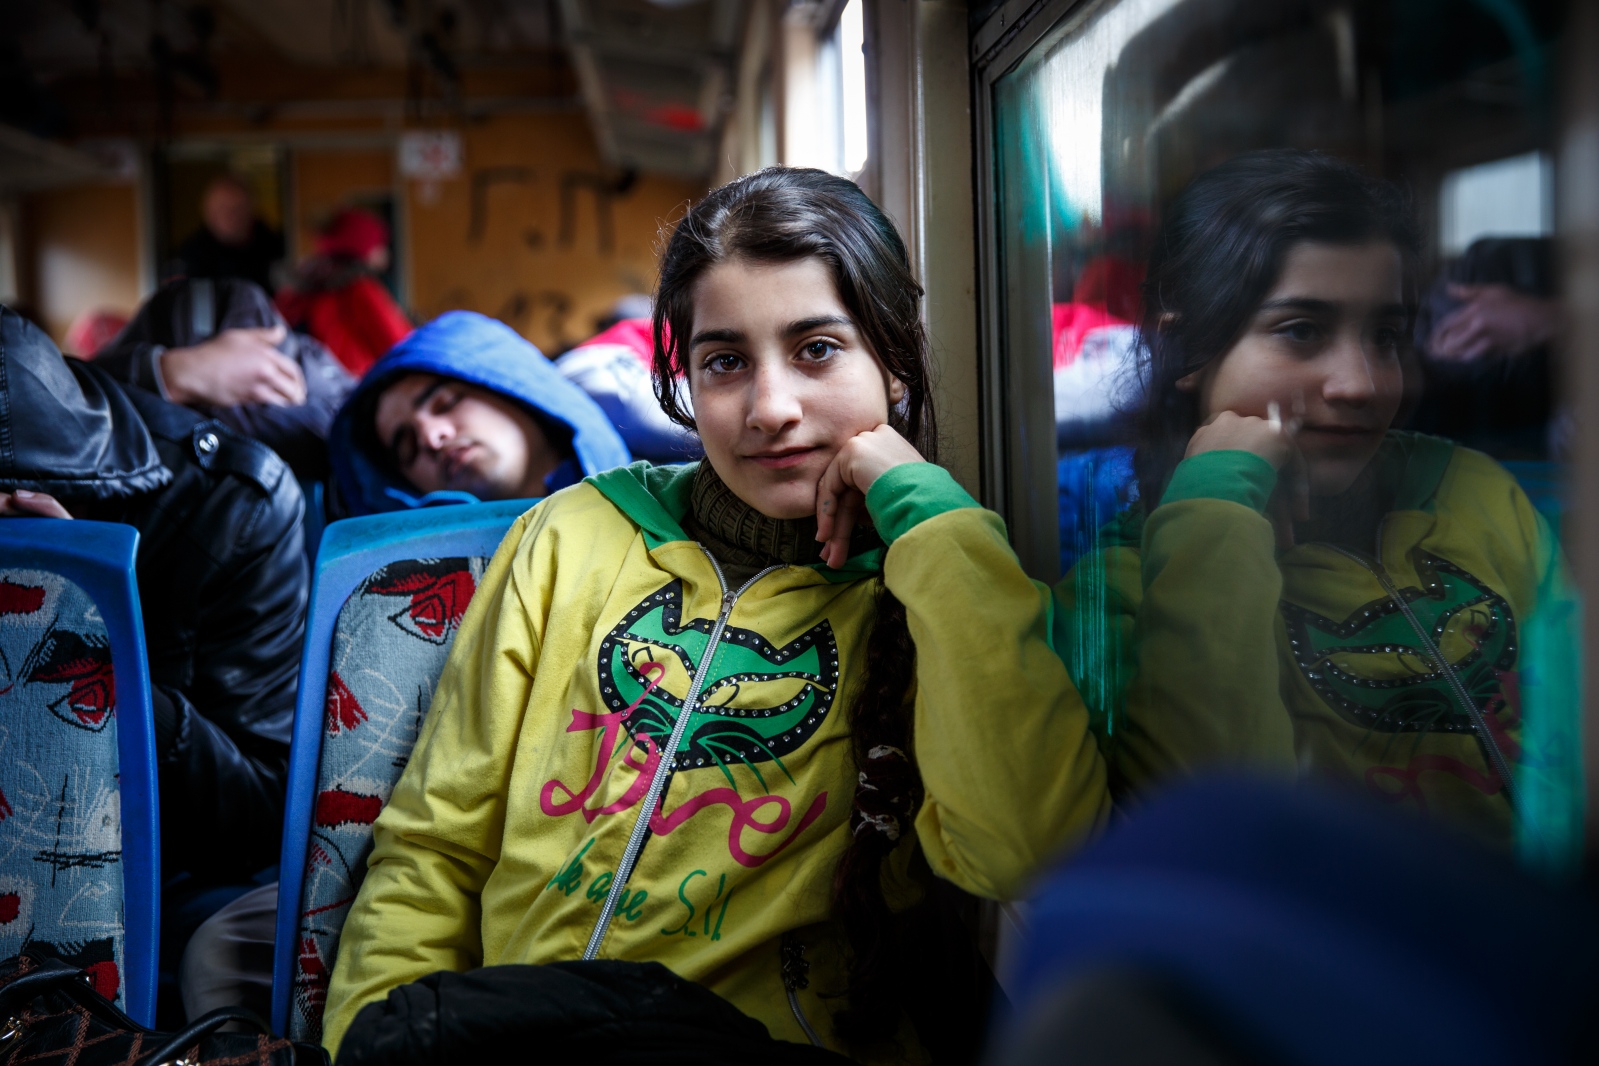  Maram, 13, a refugee from Daraa, Syria, takes the train with her family from Presevo, Serbia, to the Croatian border. From there, they will...